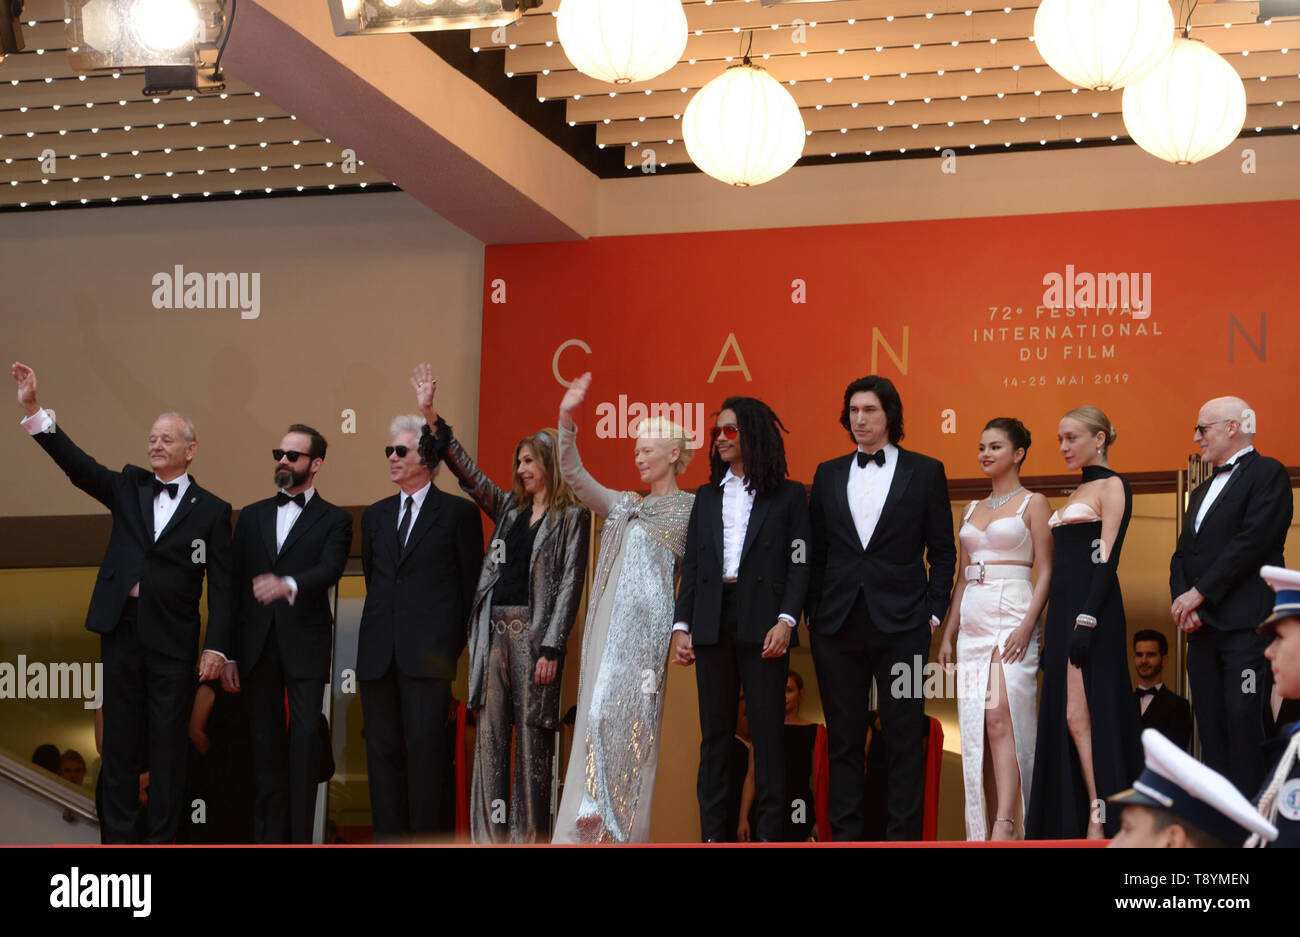 May 14, 2019 - Cannes, France - CANNES, FRANCE - MAY 14: (L-R) Bill Murray, guest, Director Jim Jarmusch, Sara Driver, Tilda Swinton, Luka Sabbat, Adam Driver, Selena Gomez and Chloe Sevigny attend the opening ceremony and screening of ''The Dead Don't Die'' during the 72nd annual Cannes Film Festival on May 14, 2019 in Cannes, France. (Credit Image: © Frederick InjimbertZUMA Wire) Stock Photo